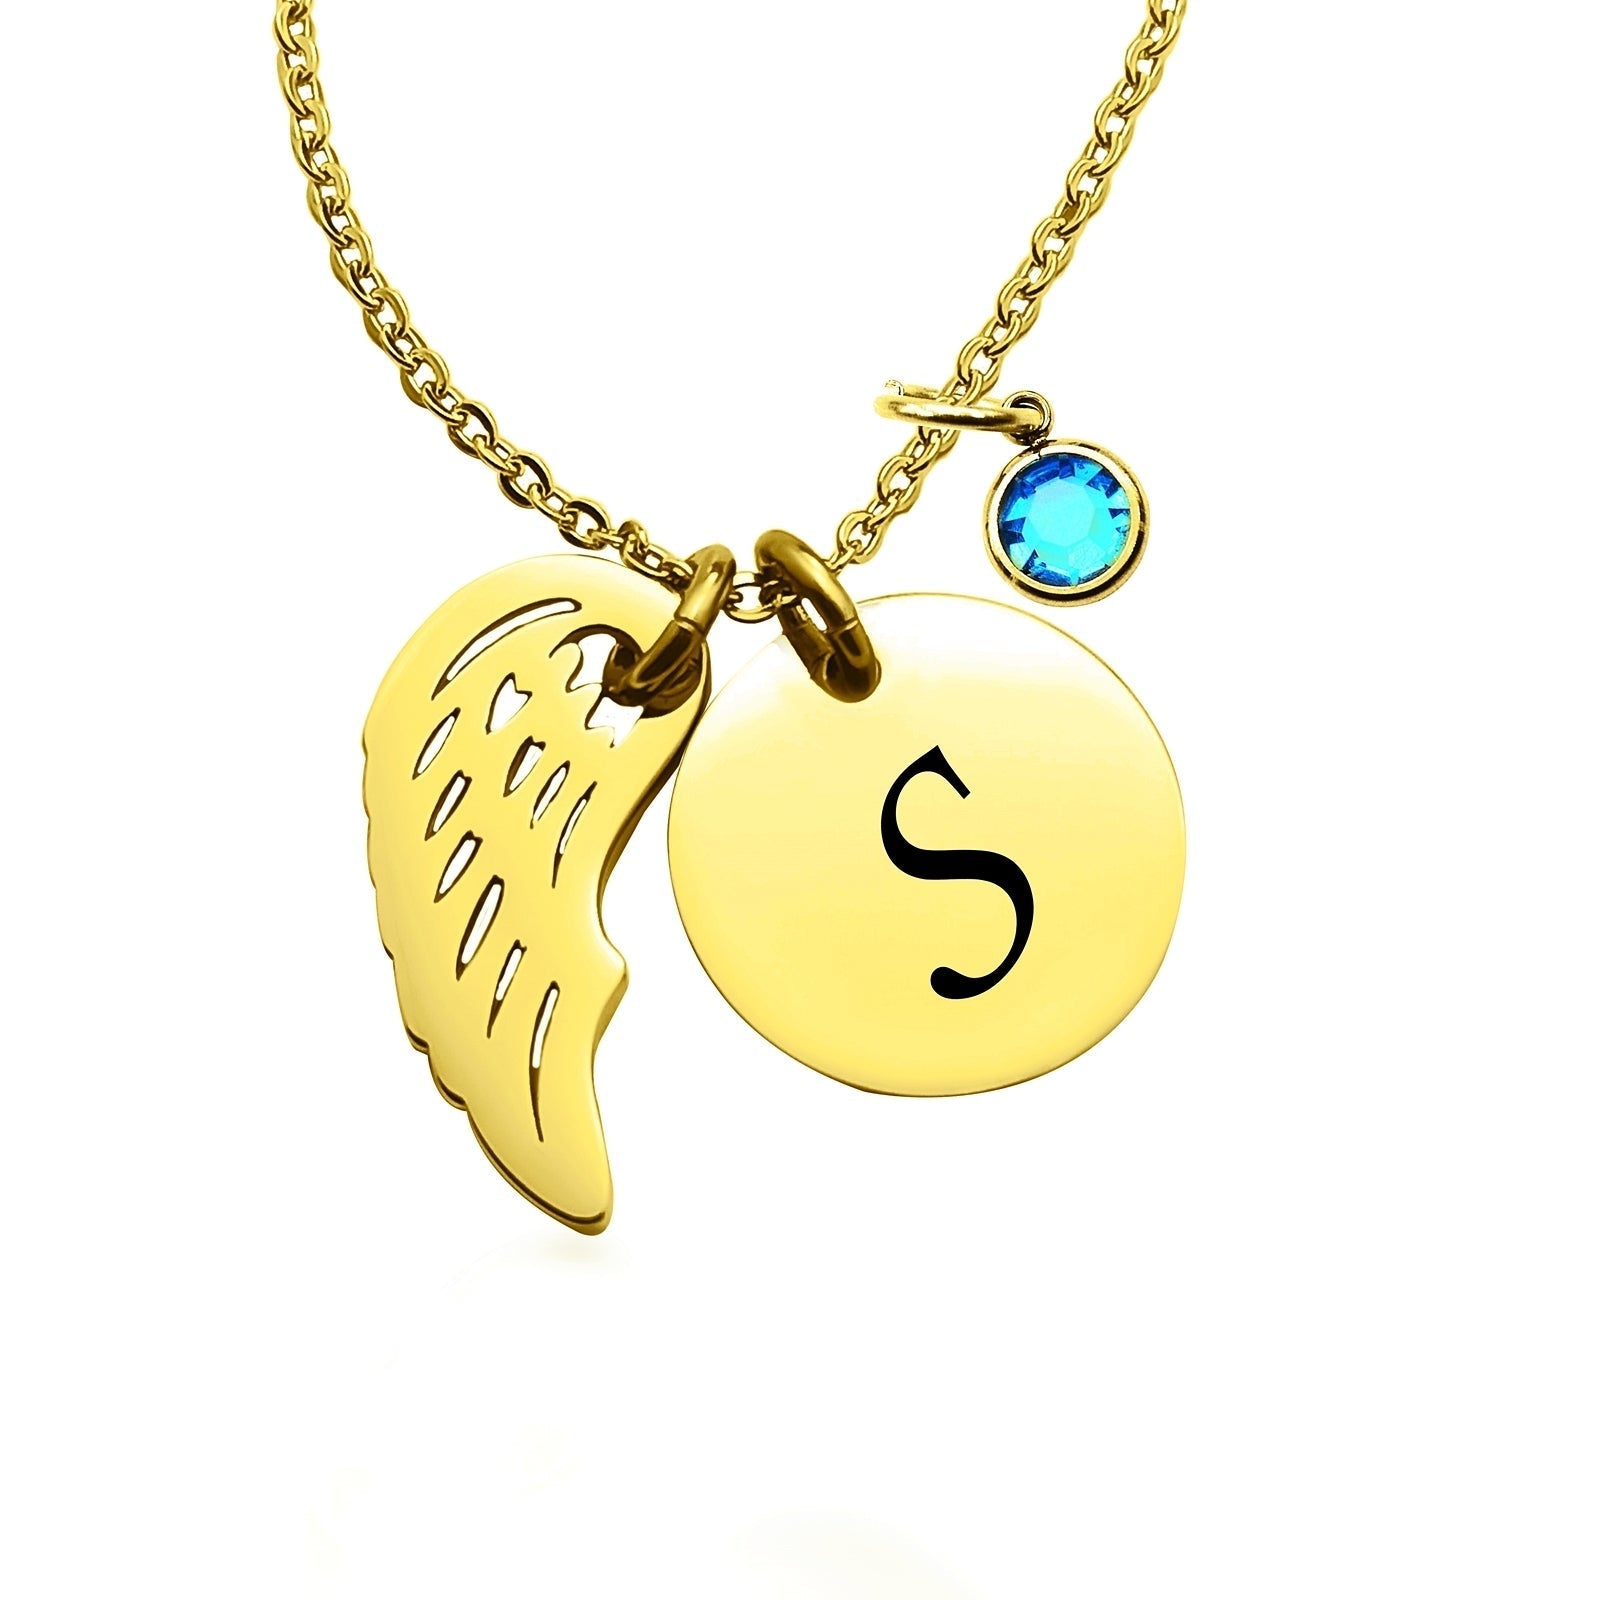 Memorial Angel Necklace with Stone Charm - Memorial & Cremation Jewellery by Belle Fever